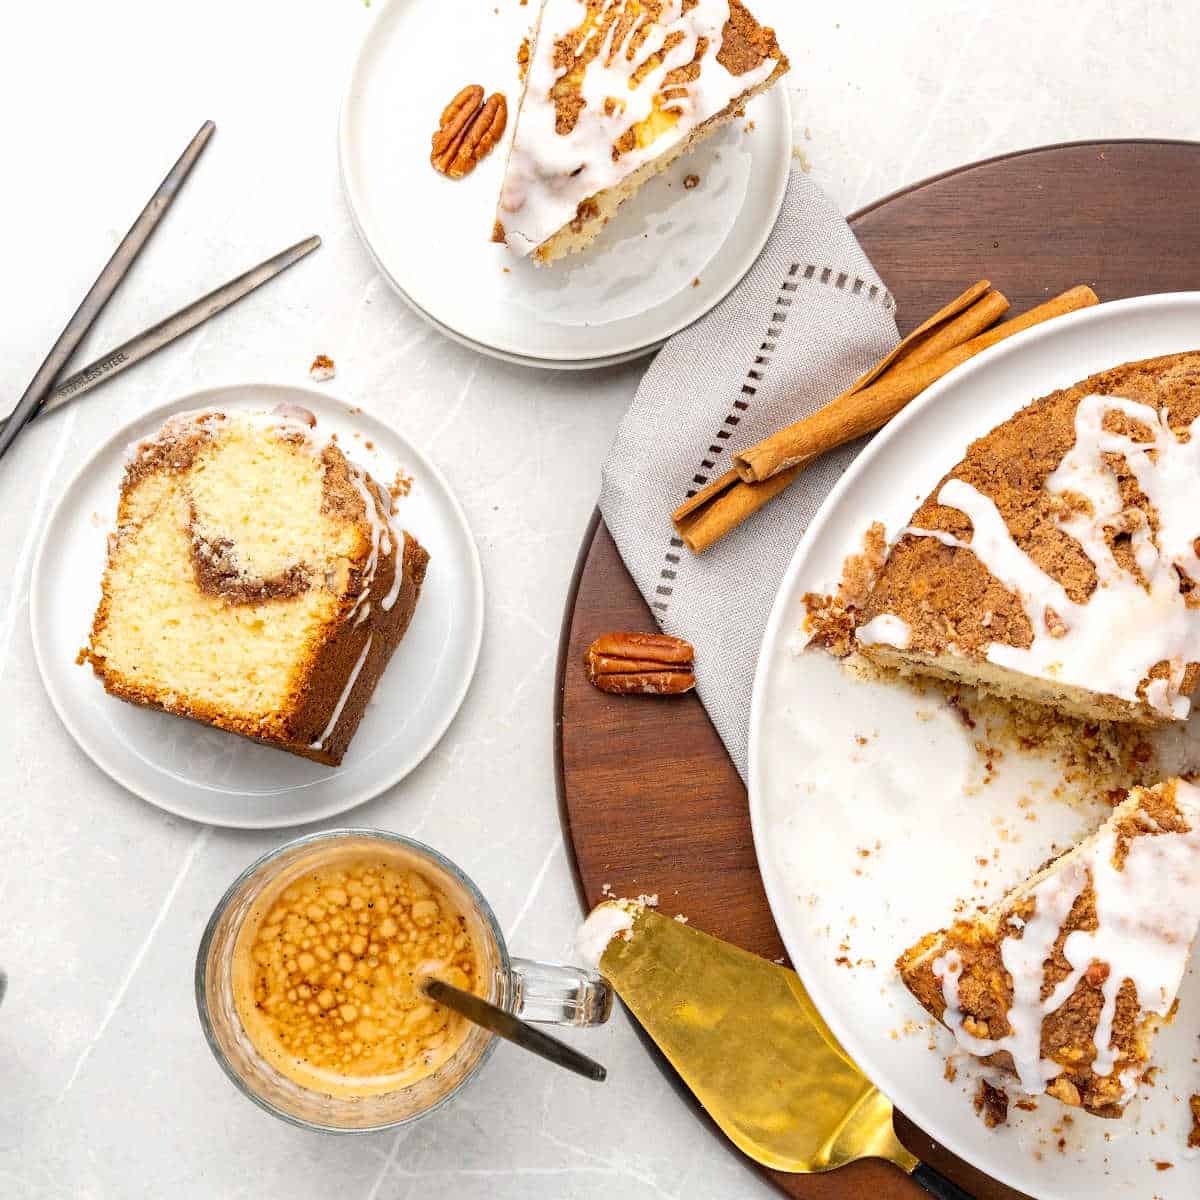 Partial view of glazed coffee cake on a white plate and wooden board. Cake slices on white plates. Light grey surface. 